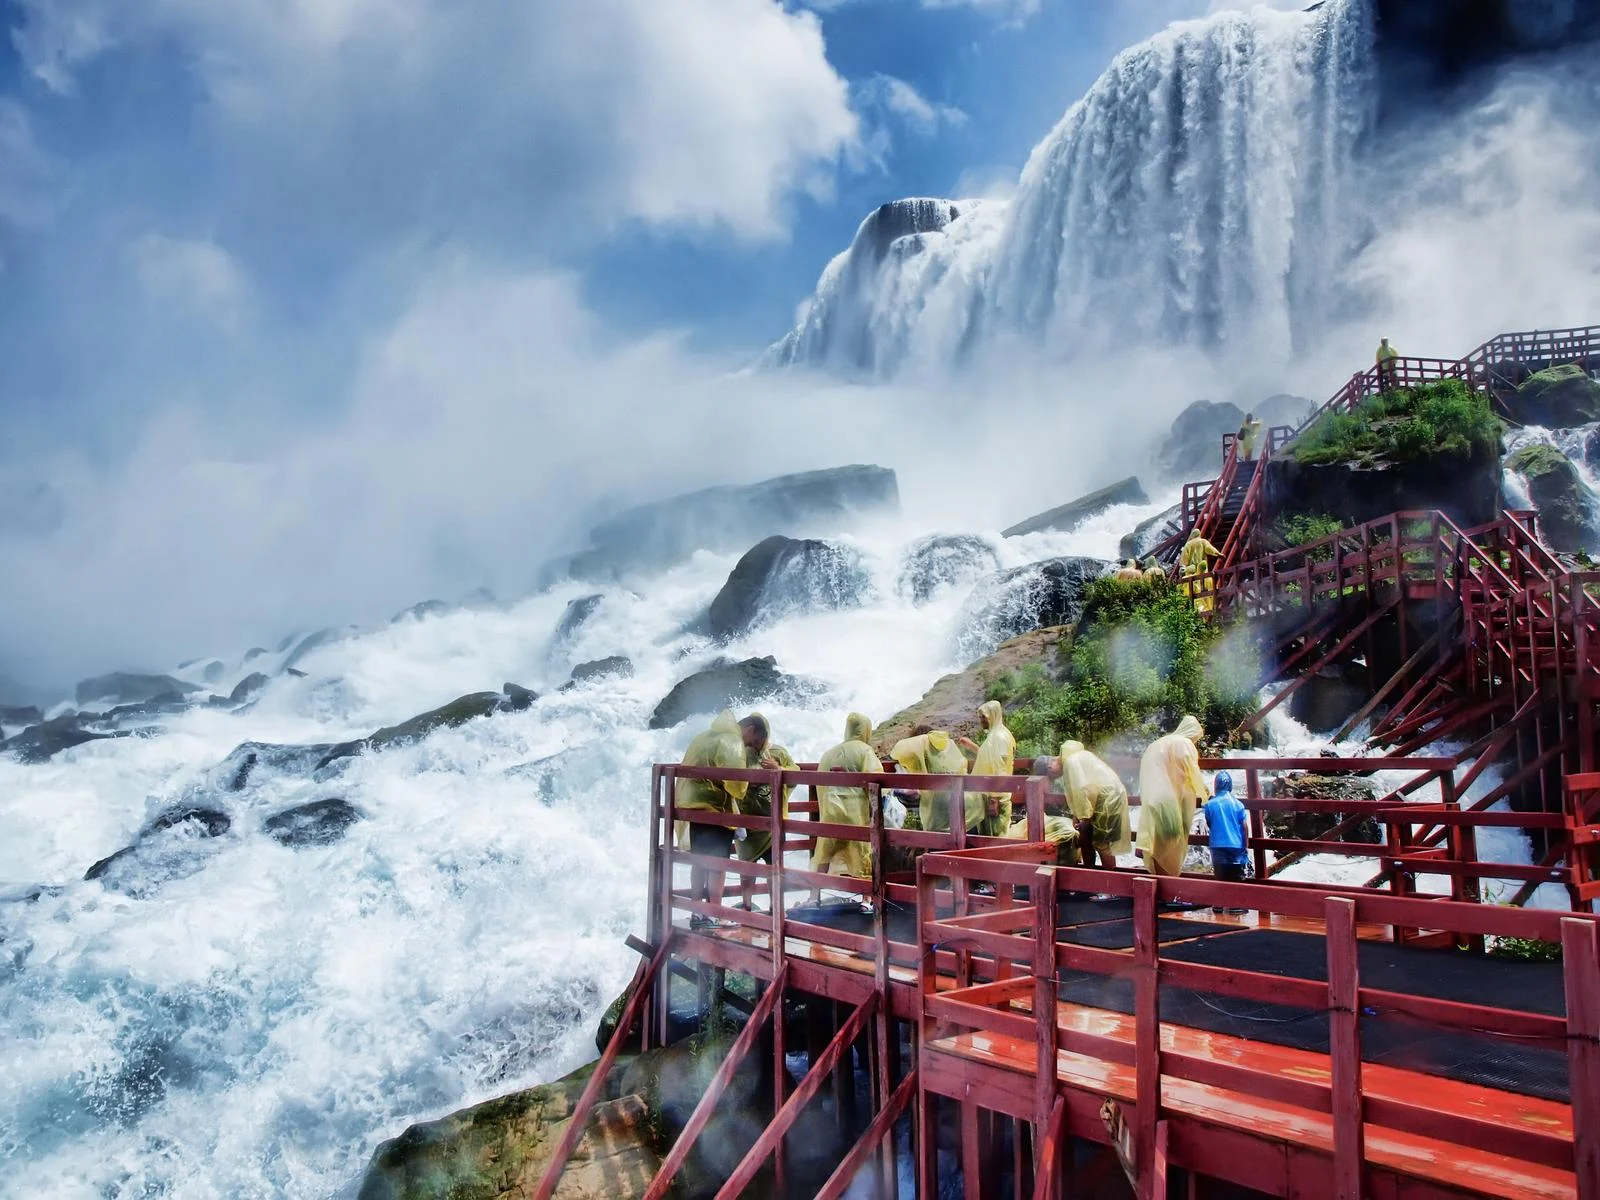 Visitors of Niagara Falls at Niagara Falls State Park, considered one of the most beautiful places in the US, wearing their raincoats as they climb up a boardwalk with stairs near the falls